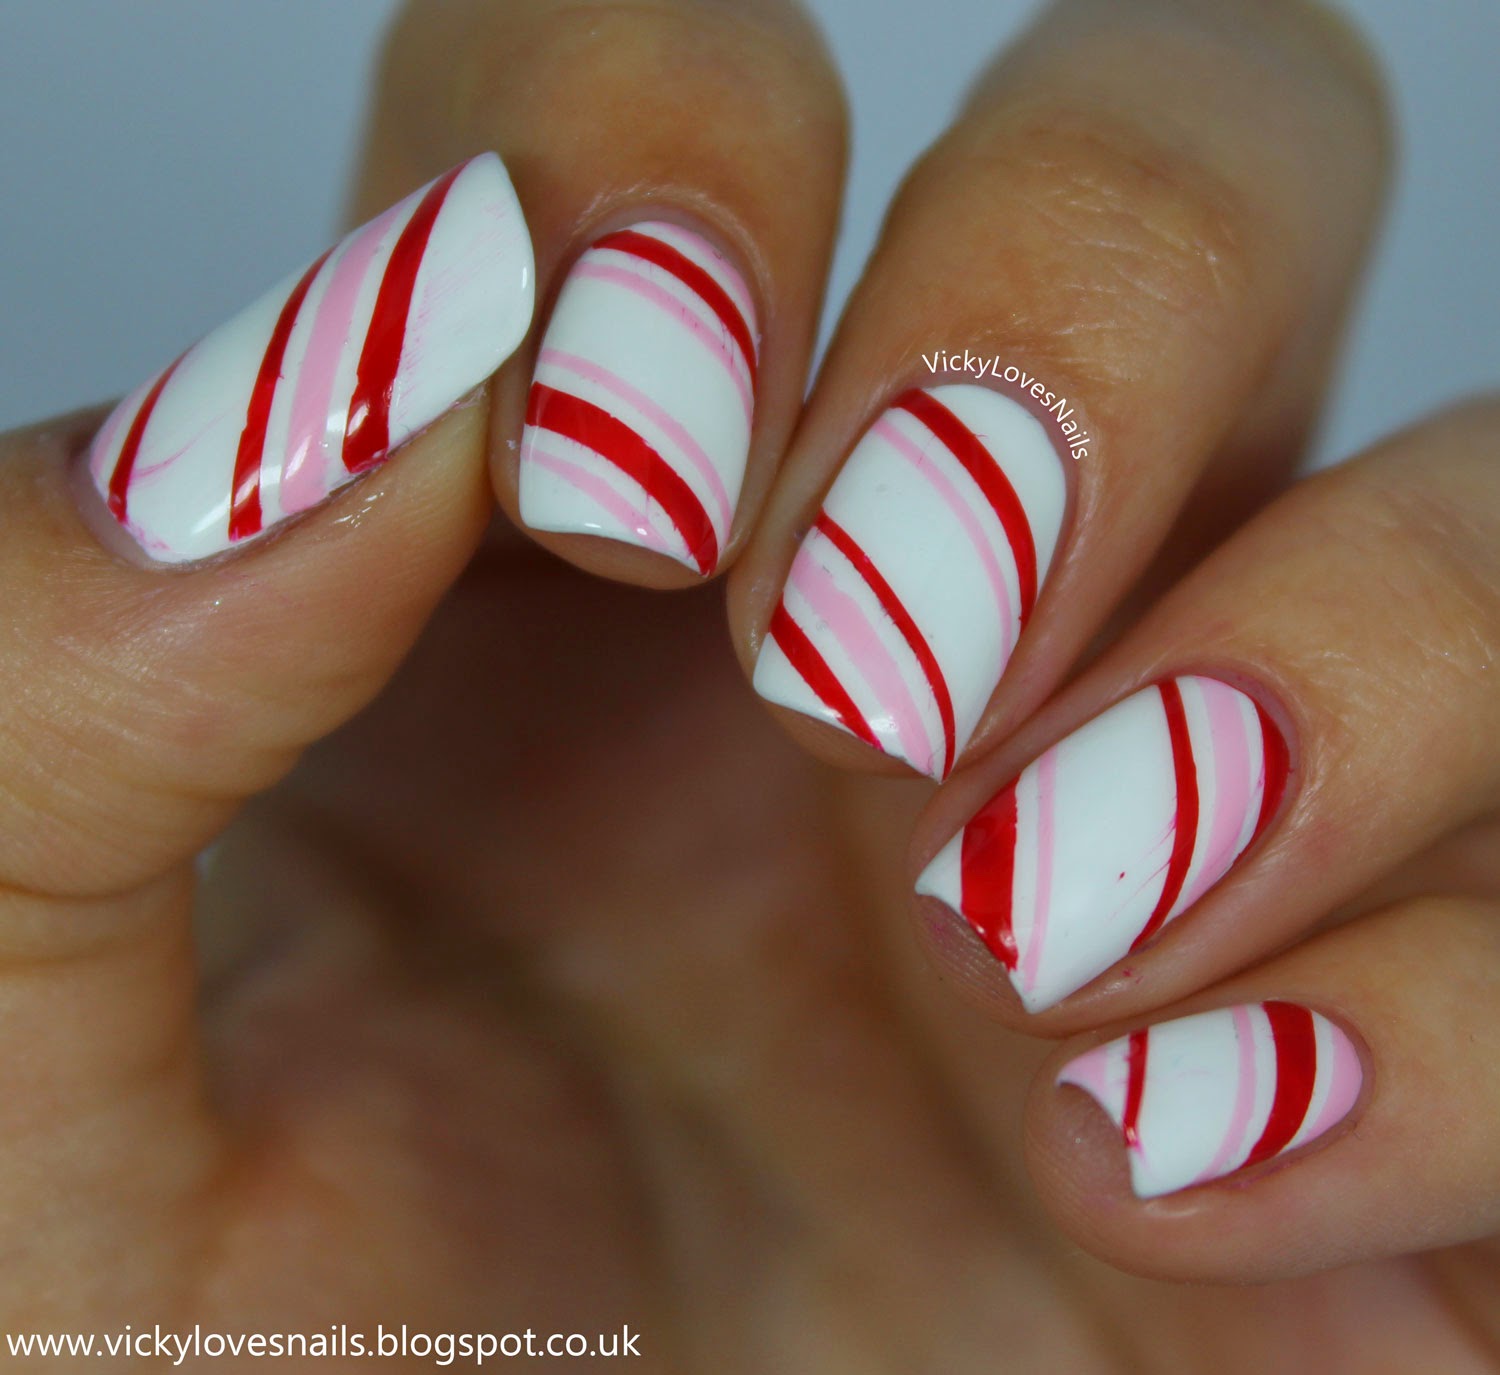 Vicky Loves Nails!: Christmas Candy Canes